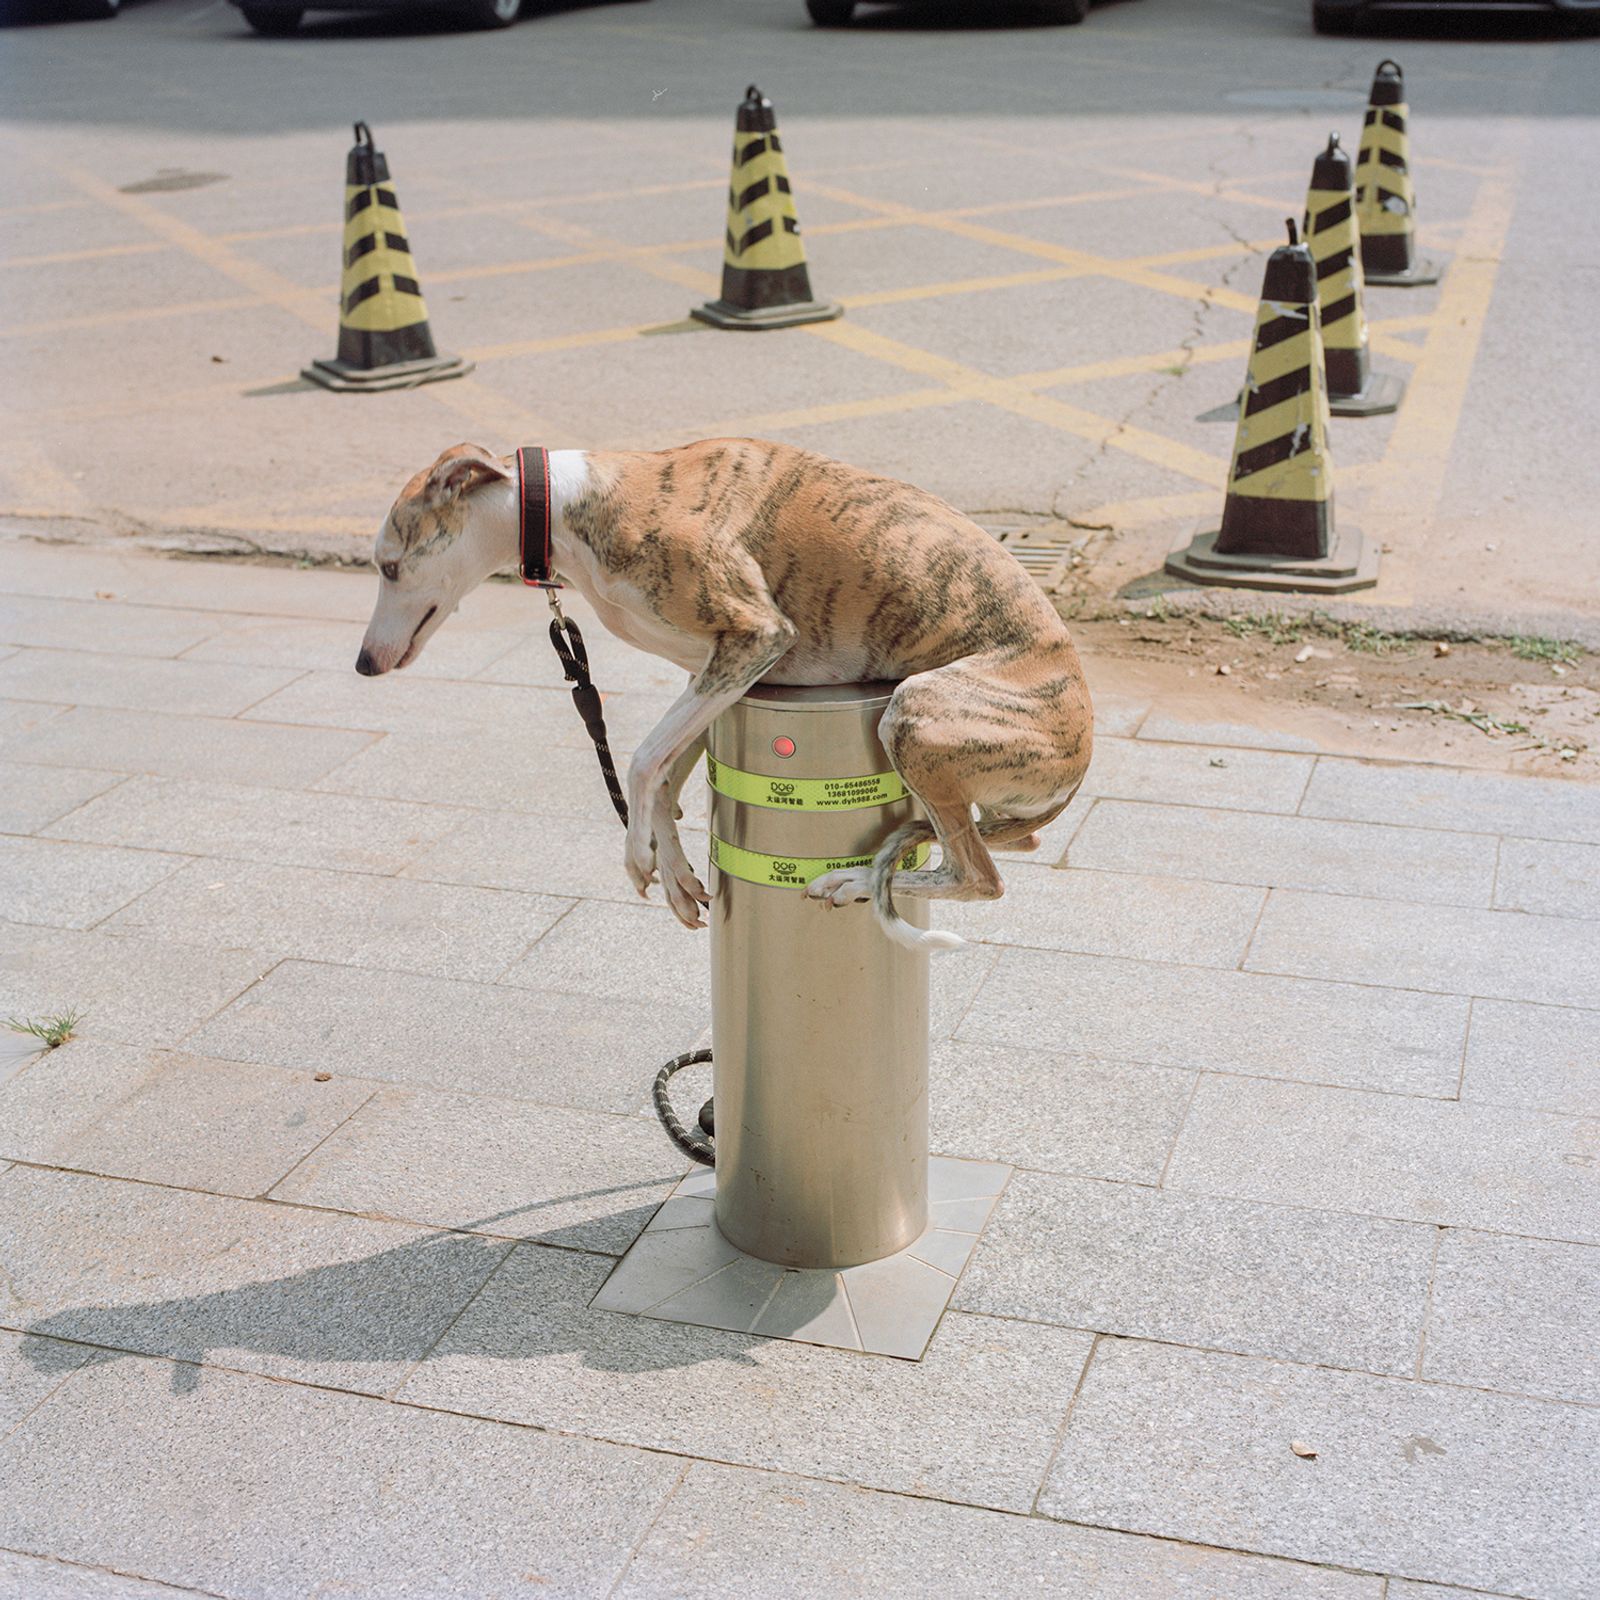 © Pang Hai - Junction : The dog is lifted up by the electronic pillar, and it must hug the pillar.